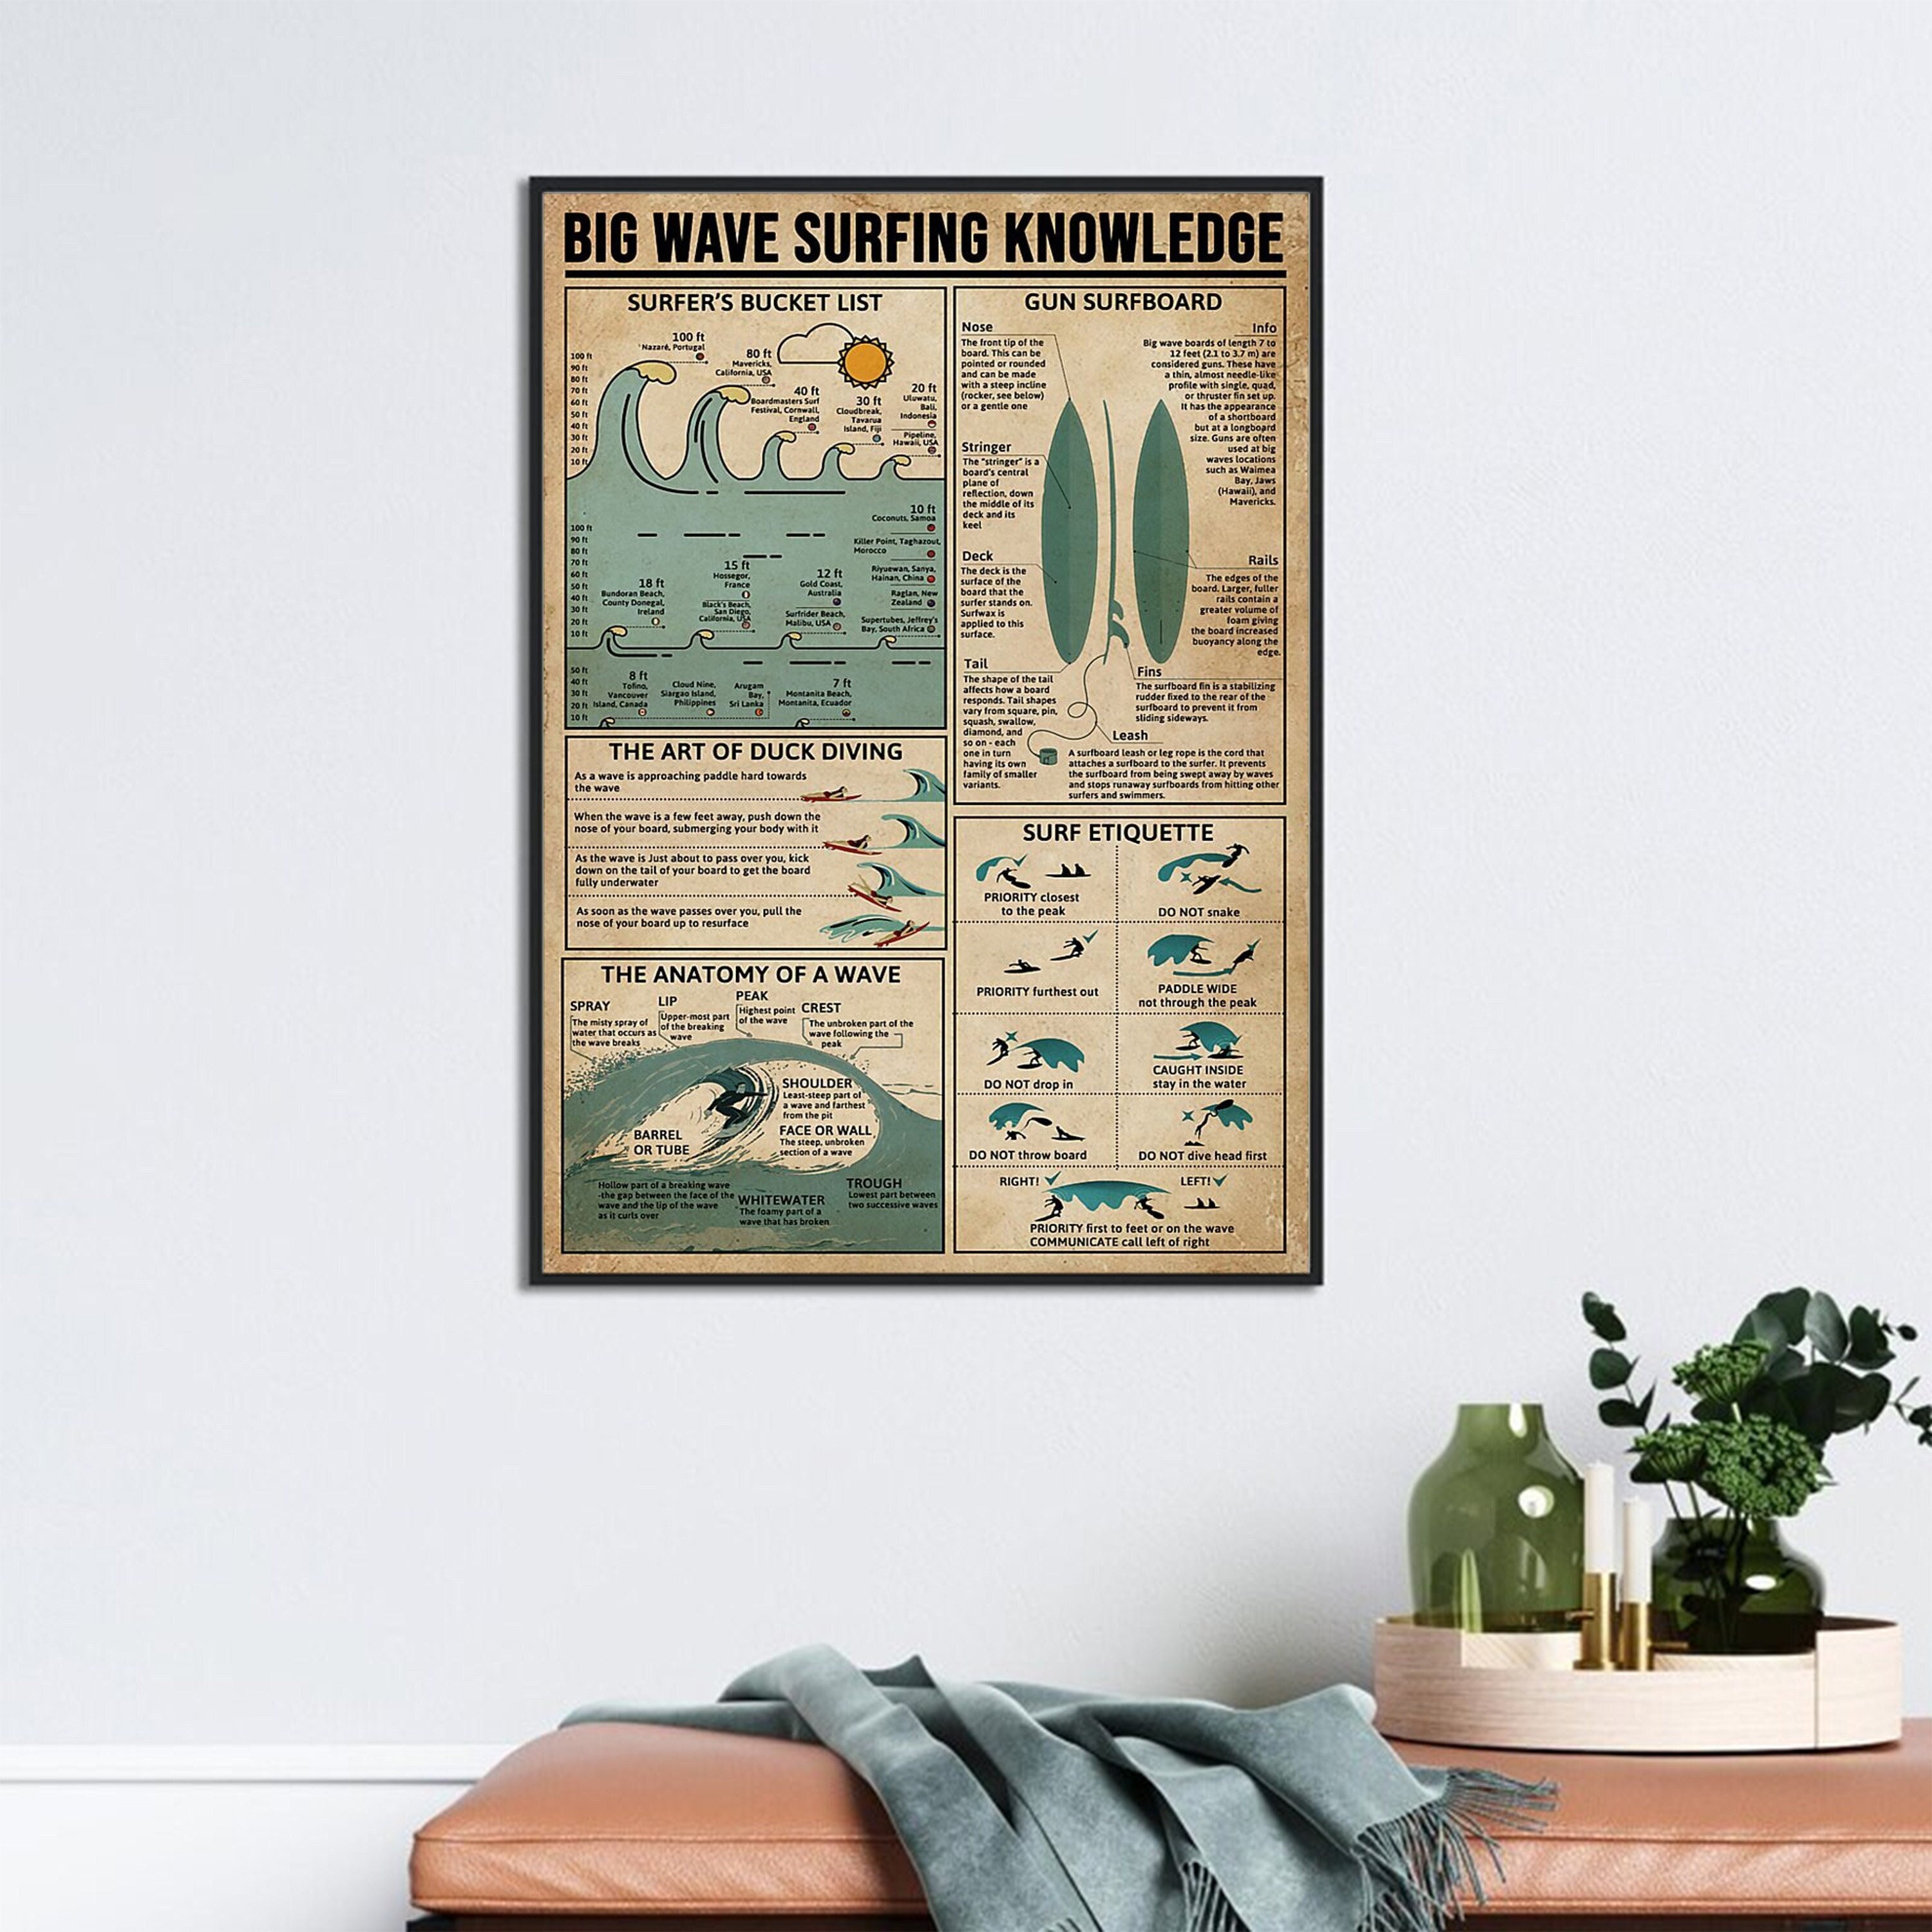 Big Wave Surfing Knowledge Poster Surfer's Bucket List - Etsy